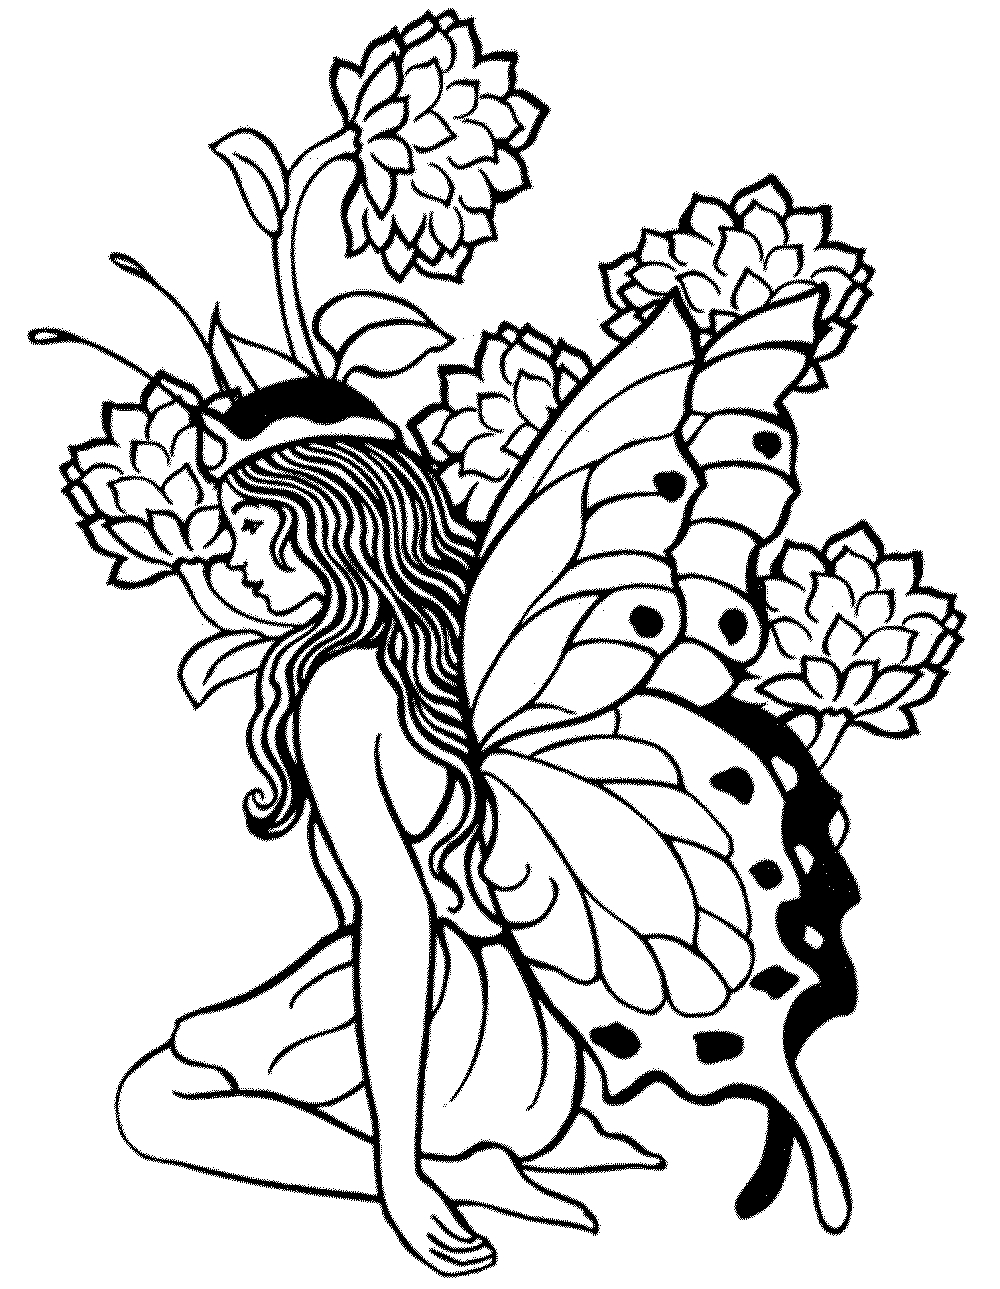 Printable Adult Coloring Pages Fairy - Coloring Home - Free Printable Fairy Coloring Pictures